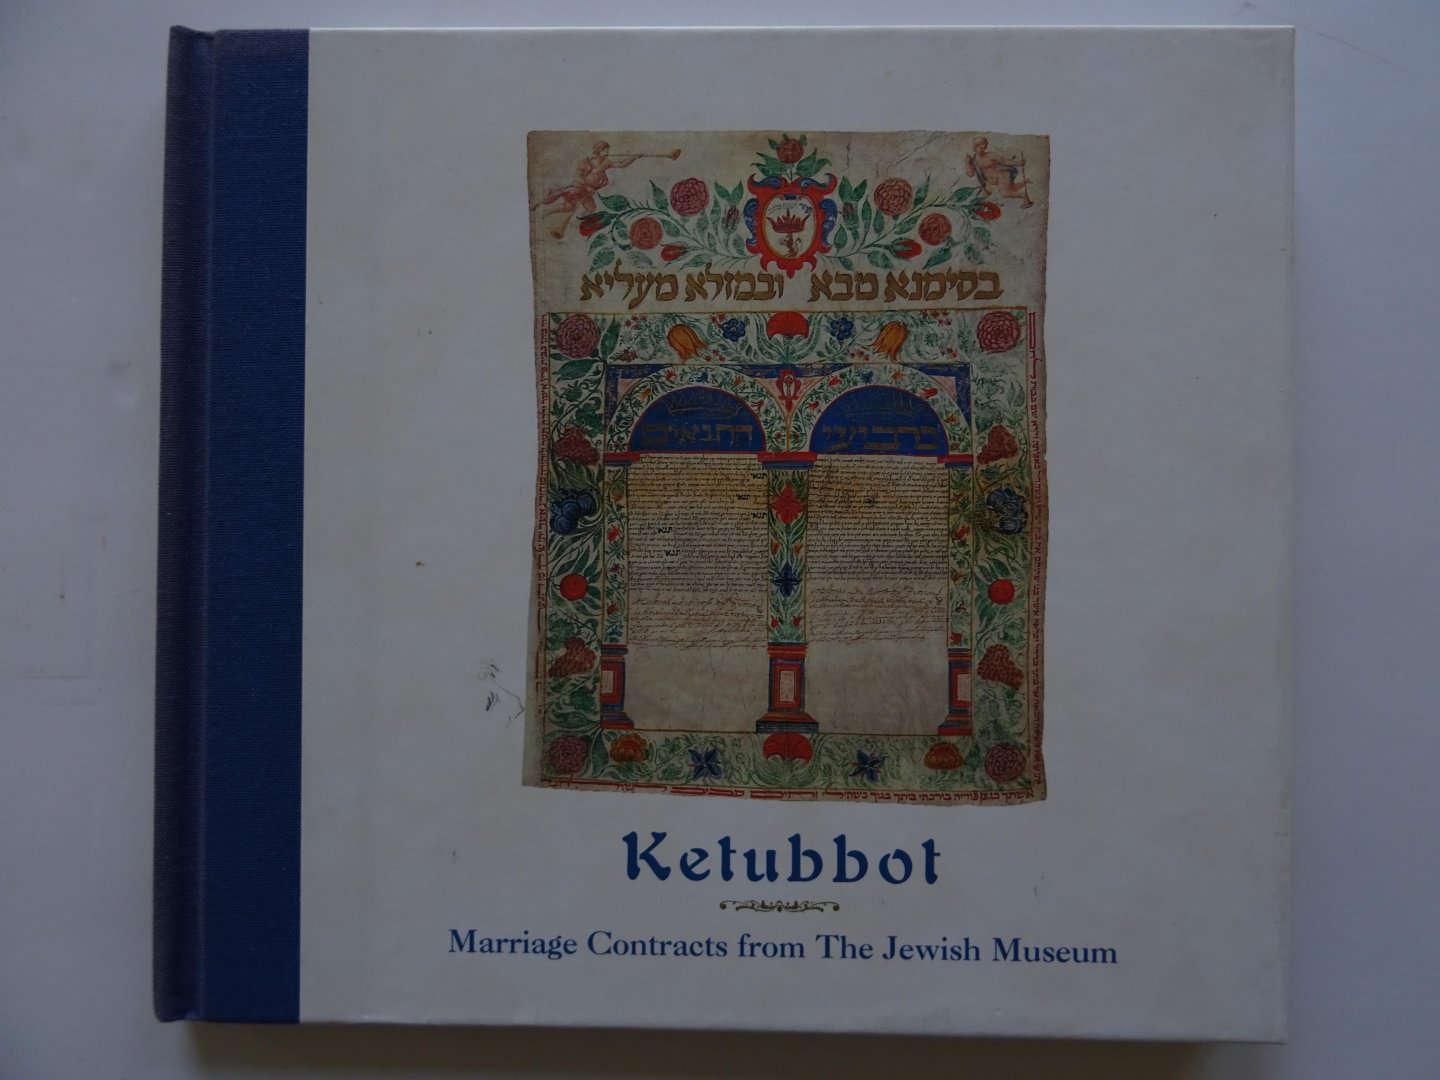 Nahson, Claudia J. - Ketubbot. Mariage contracts from the Jewish Museum.